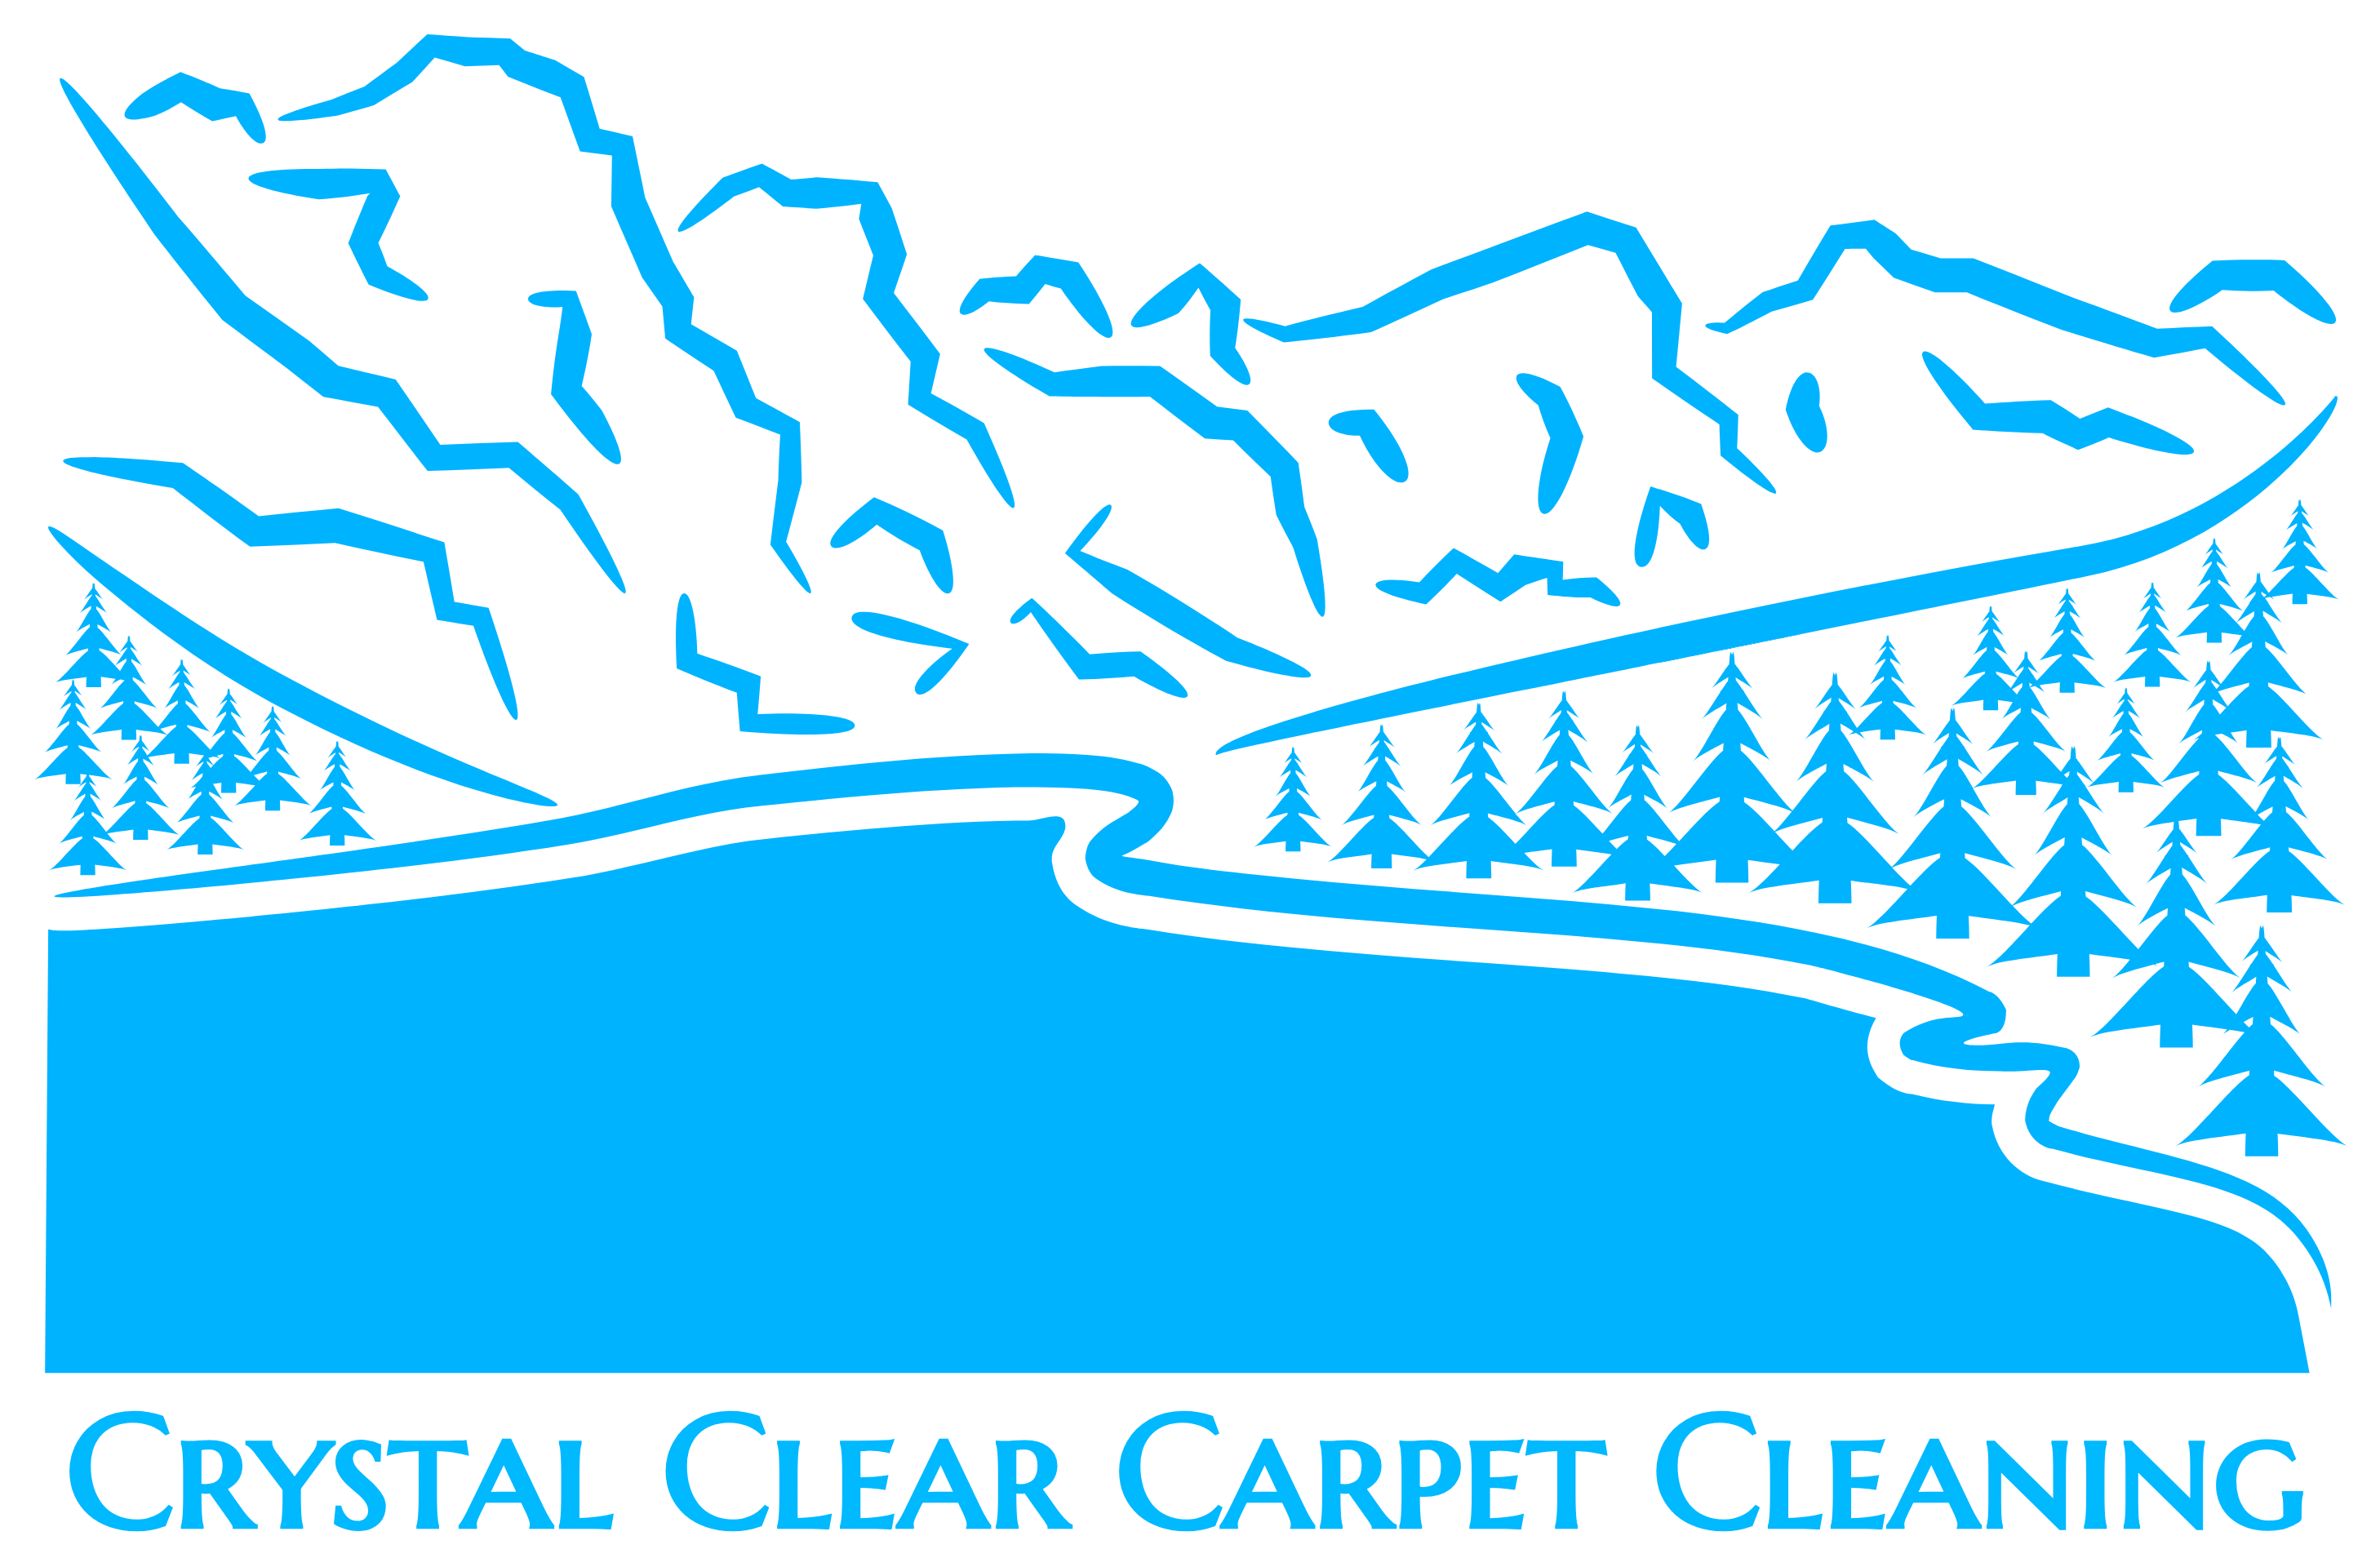 Offering Carpet, Rug, and Upholstery  Offering Carpet, Rug, and Upholstery Cleaning to the Flathead Valley. Starts at $99 for 1 room and a hall. $119 for 2 rooms and a hall. Additional rooms are $35/each after 2 rooms. Deodorizer, stain removal, and other special treatments are available for additional cost. Call 406-300-1312 Find us on Facebook!